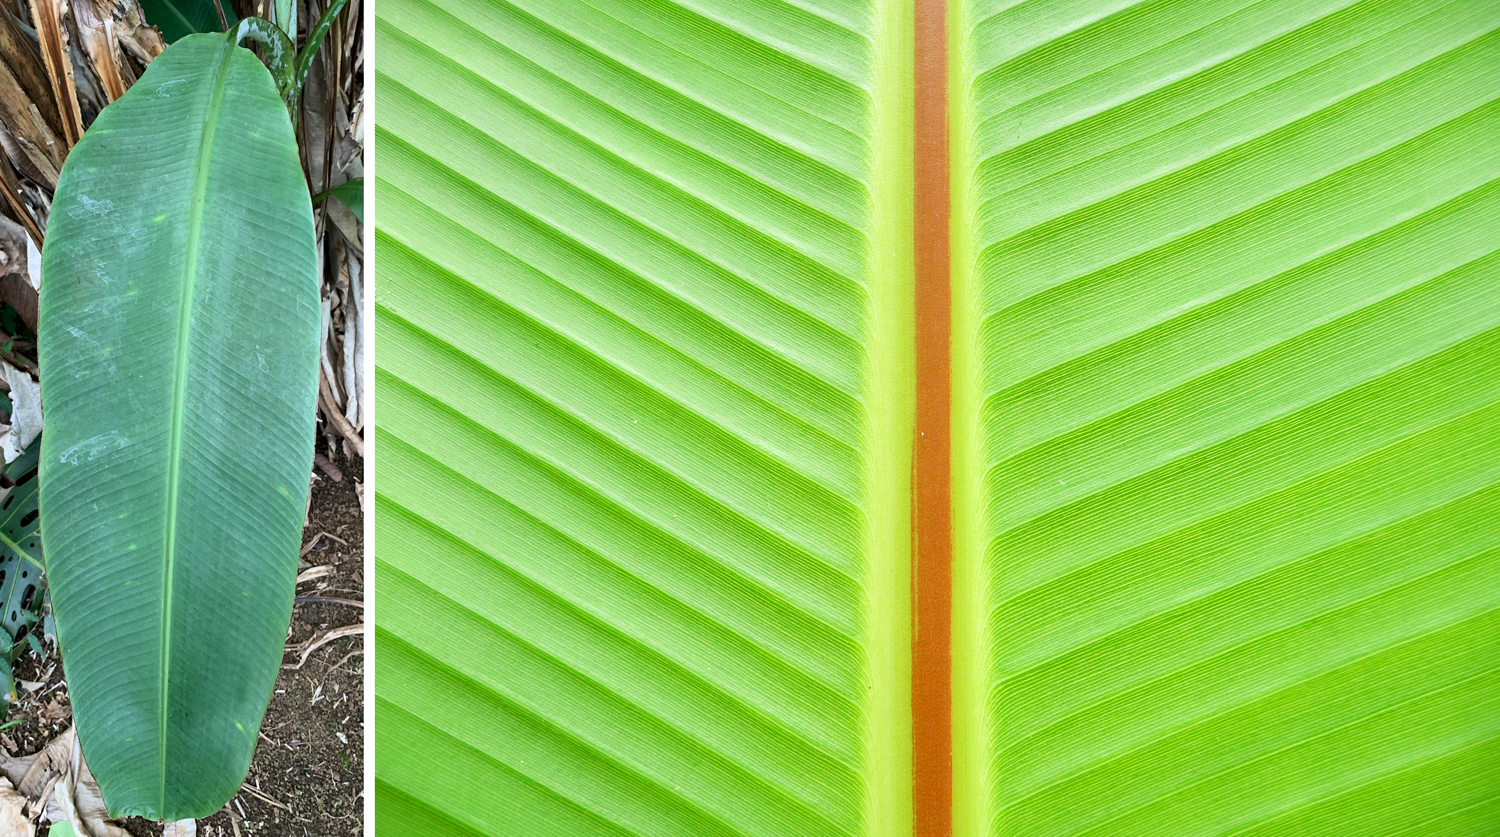 2-Panel figure of color photographs of banana leaves. Panel 1: Whole leaf showing midvein and parallel lateral veins. Panel 2. Detail of midvein and parallel lateral veins.